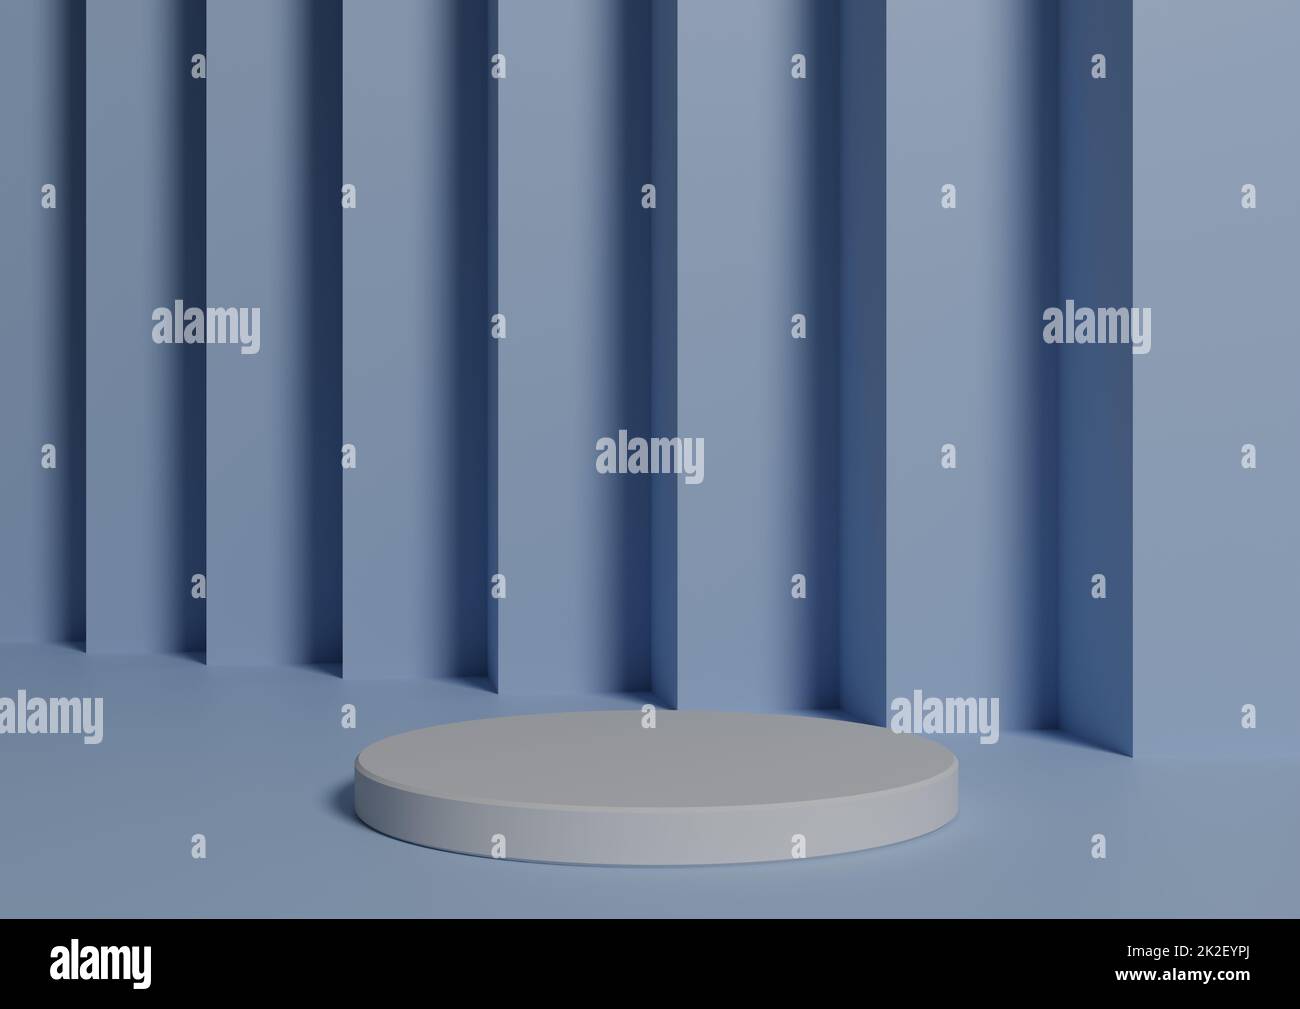 Simple, Minimal 3D Render Composition with One White Cylinder Podium or Stand on Abstract Light Blue Background for Product Display Stock Photo